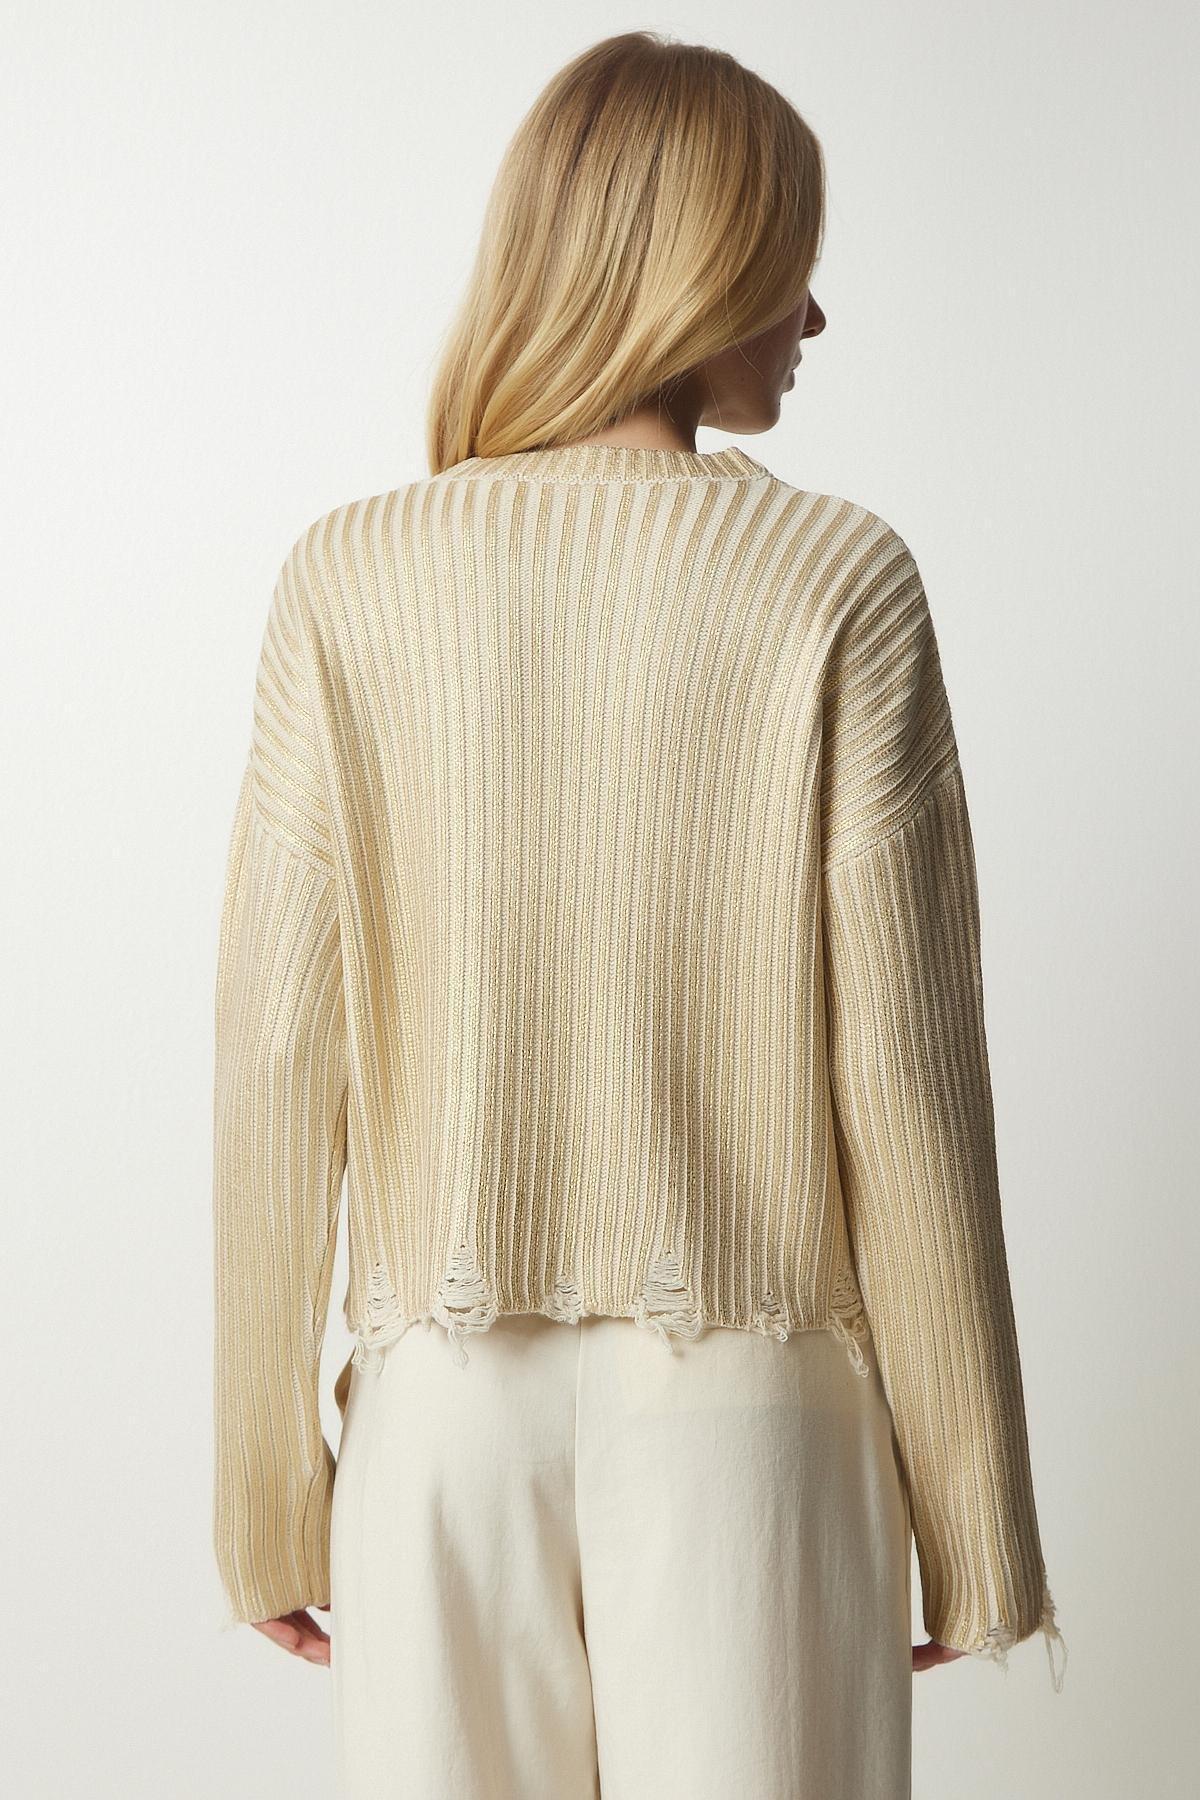 Happiness Istanbul - Yellow Ripped Detail Knitwear Sweater